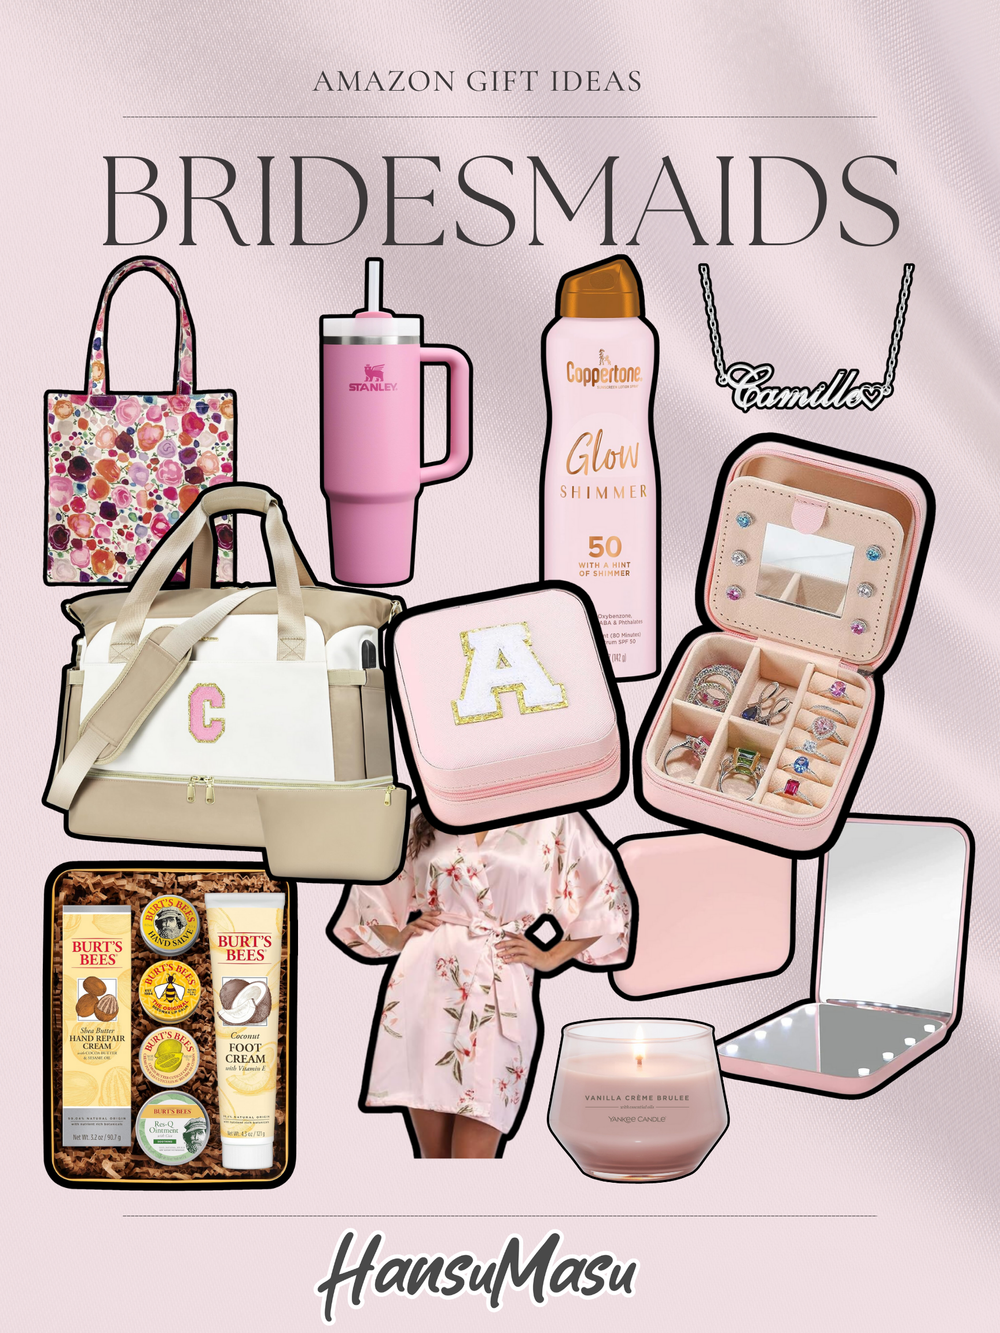 Top 10 Bridesmaid Gift Ideas from Amazon: Awesome Finds for Your Crew ...